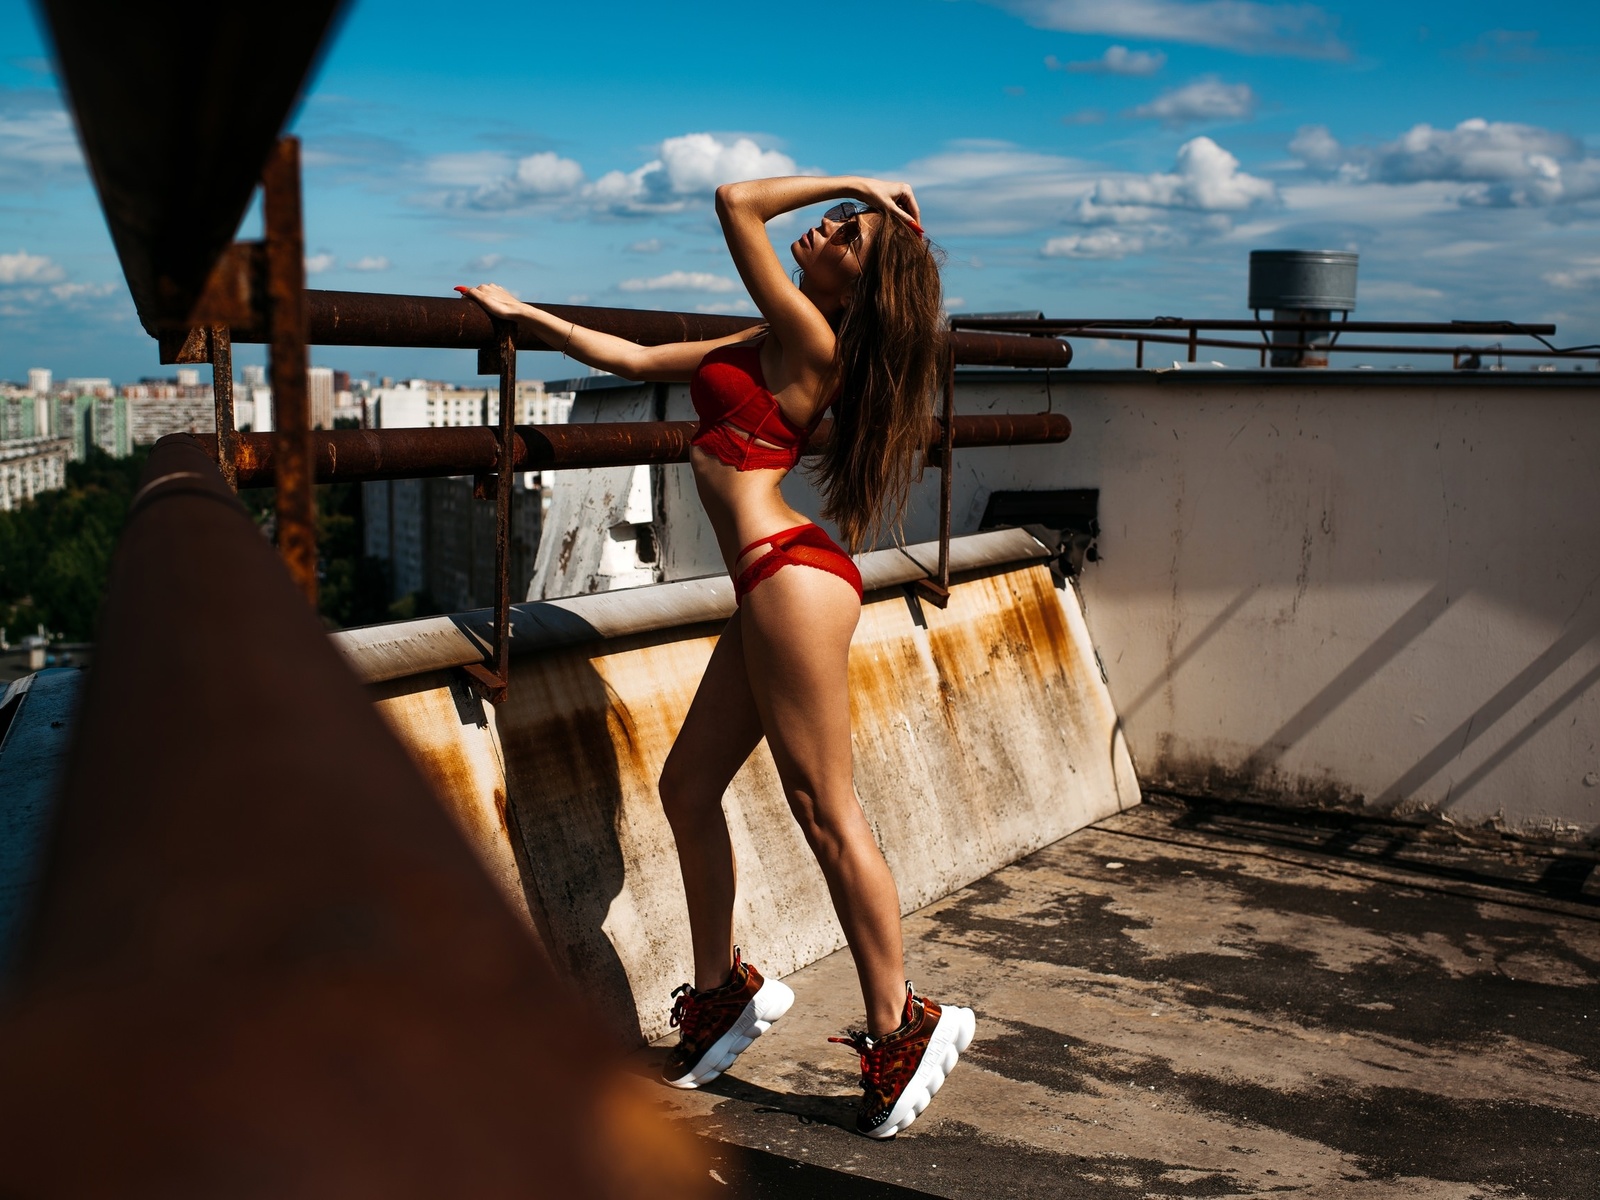 women, sunglasses, rooftops, sneakers, ass, brunette, ribs, red nails, red lingerie, sky, clouds